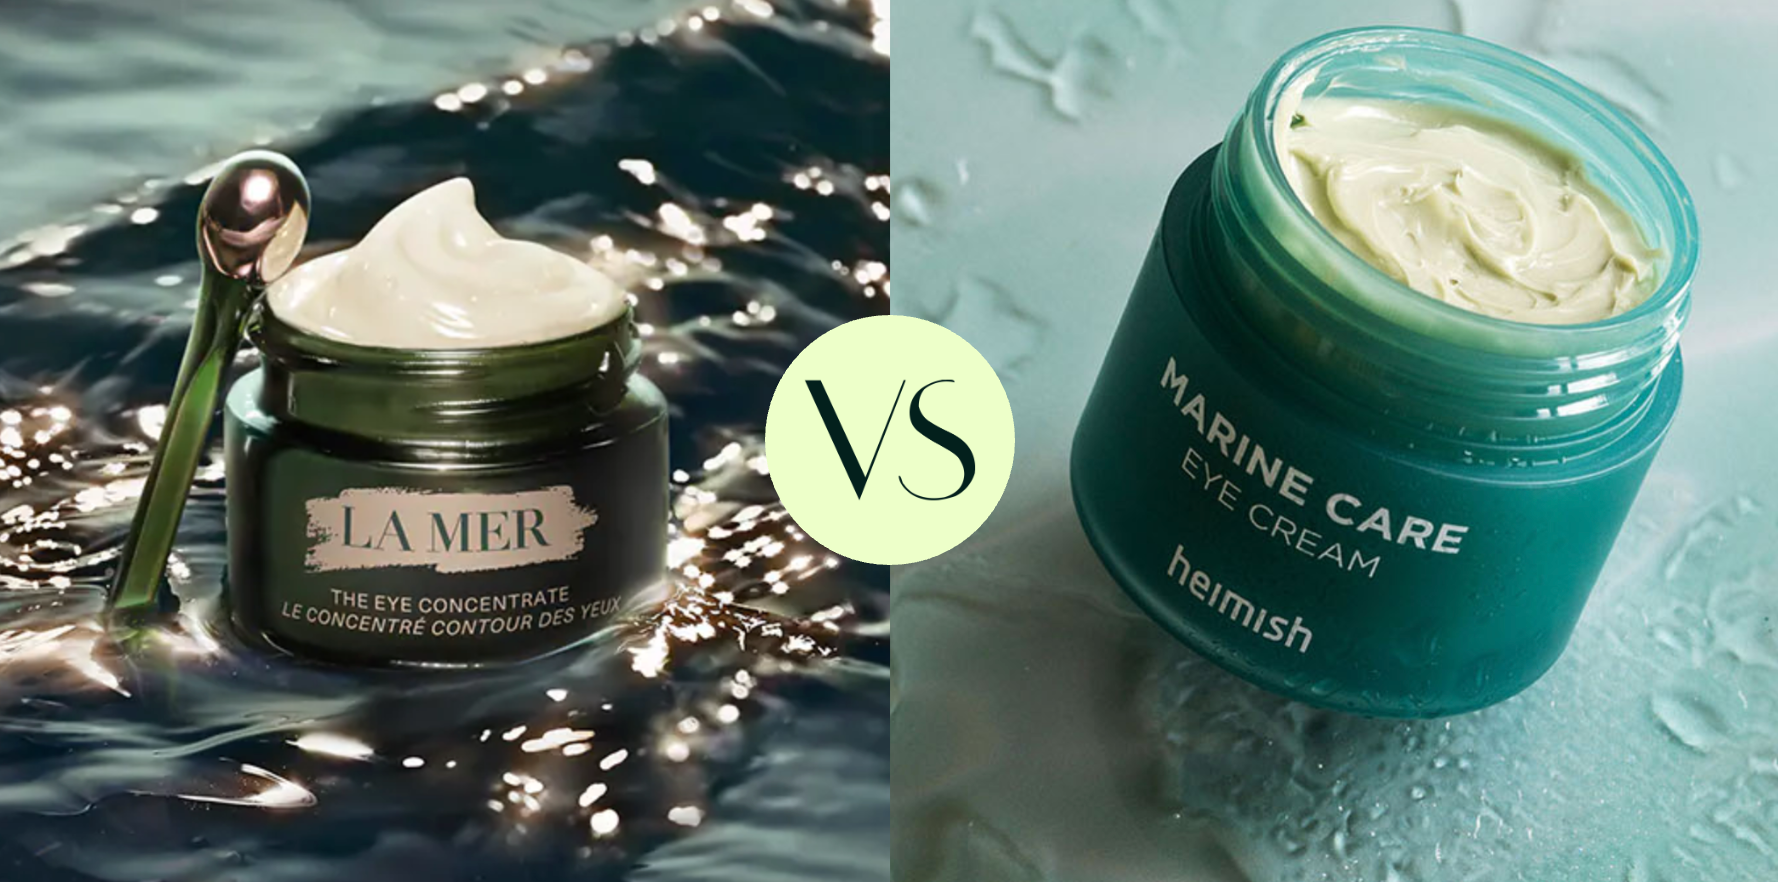 La Mer's Eye Concentrate Dupe